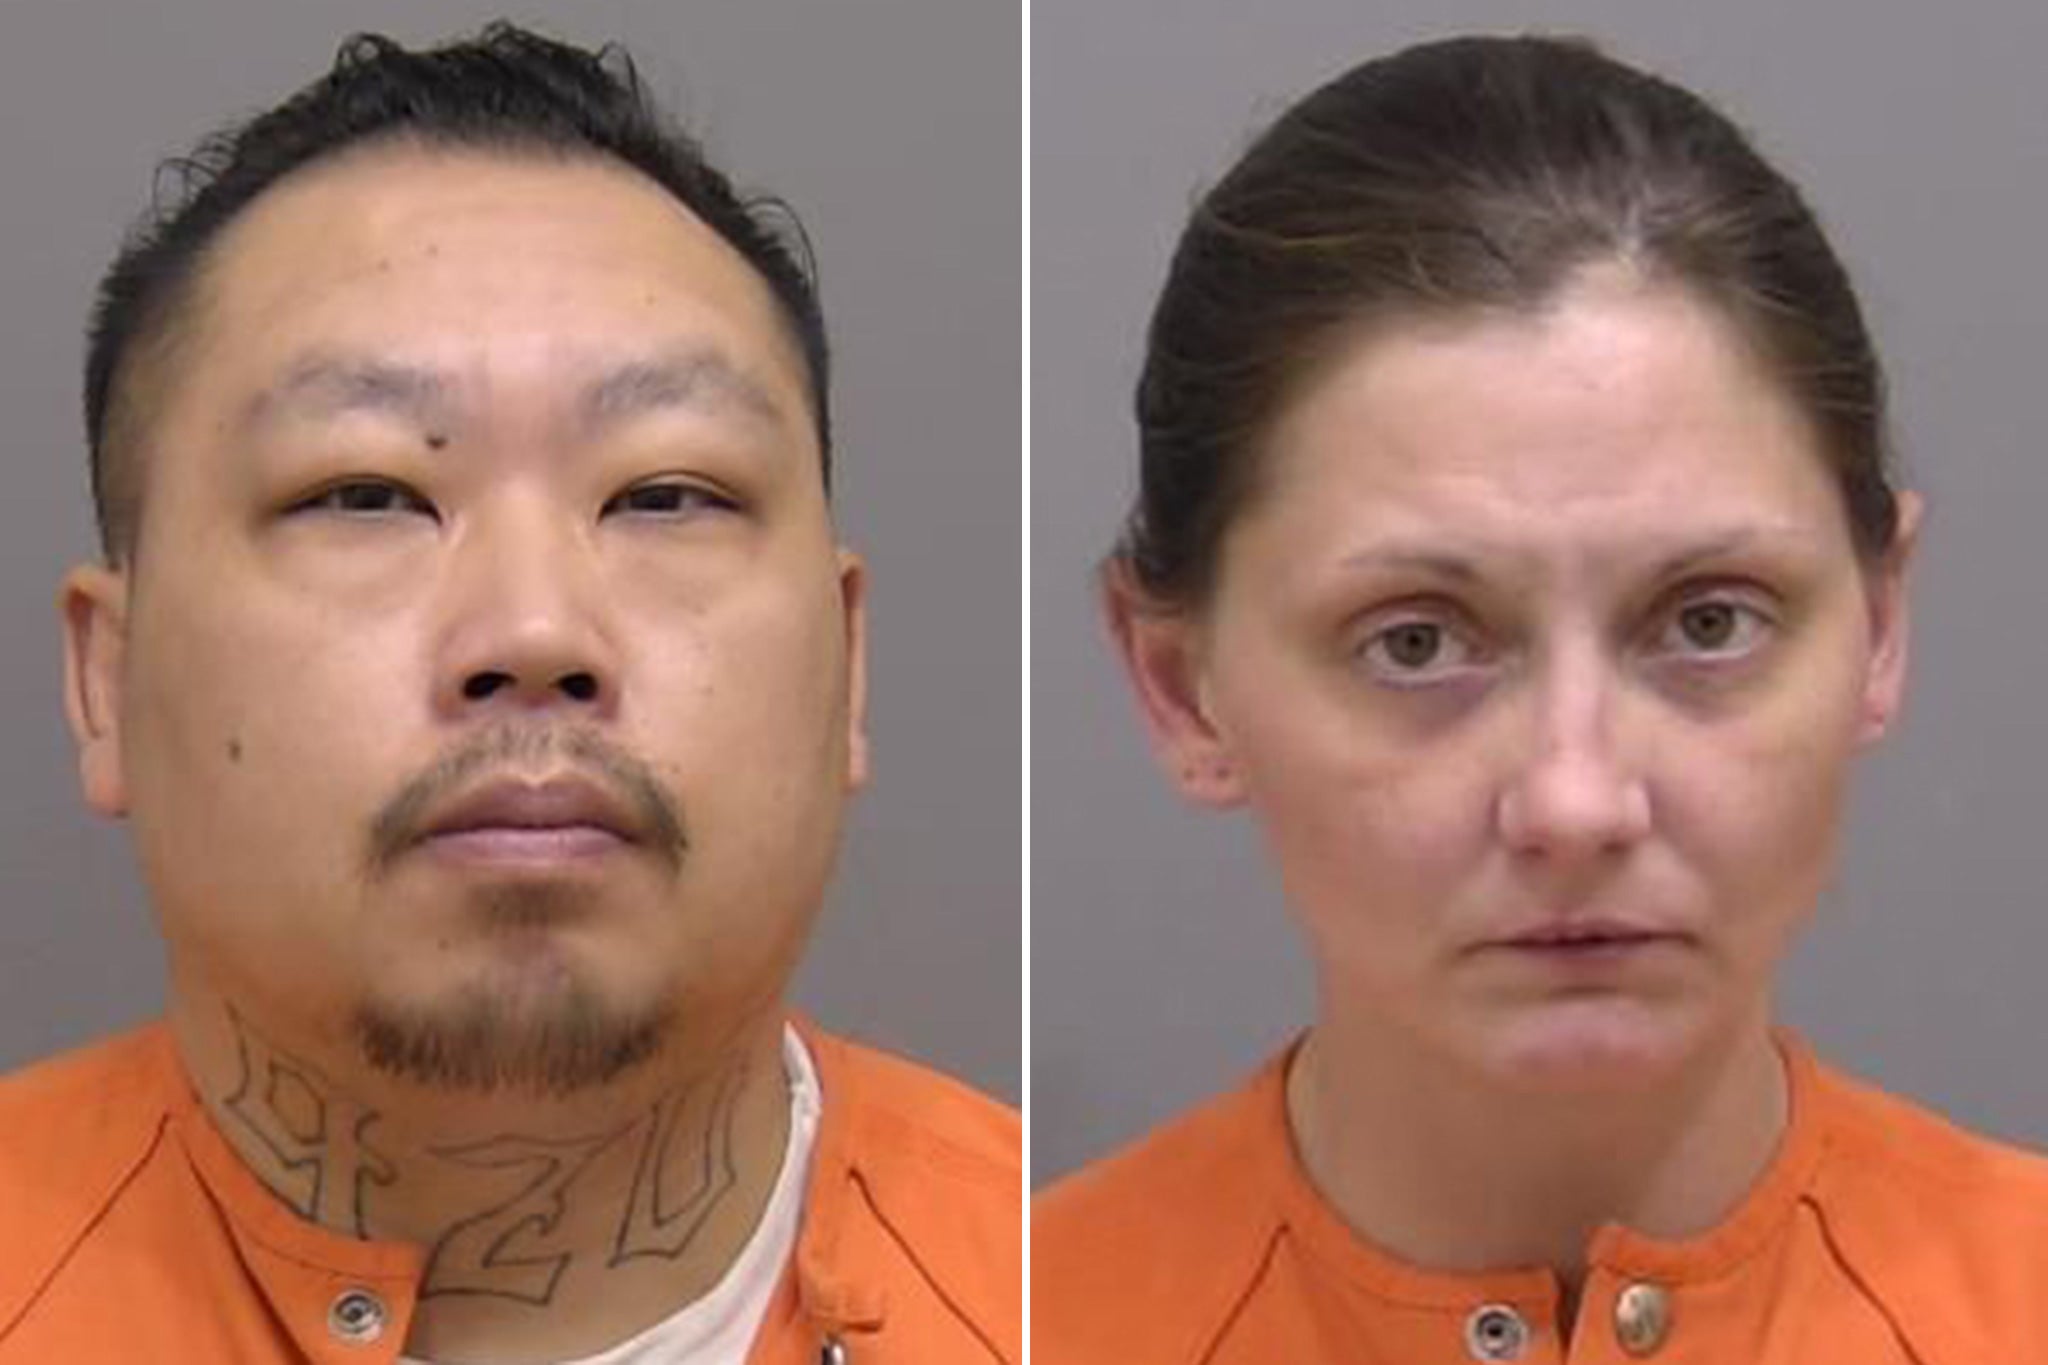 Jesse Vang and Katrina baur both face charges of chronic child neglect